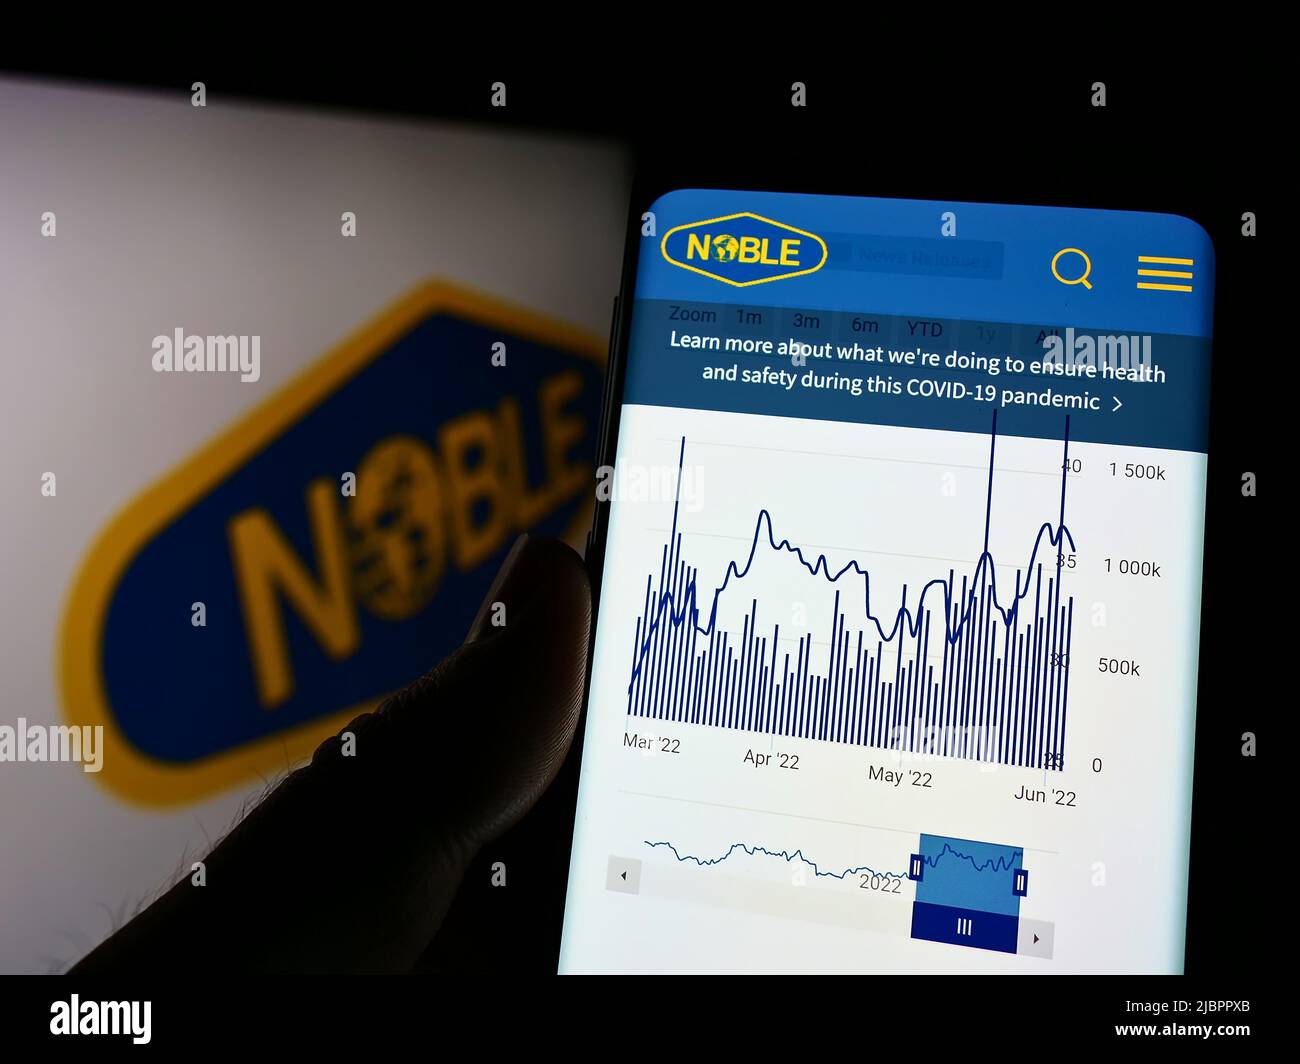 Person holding cellphone with webpage of drilling company Noble Corporation plc on screen in front of logo. Focus on center of phone display. Stock Photo